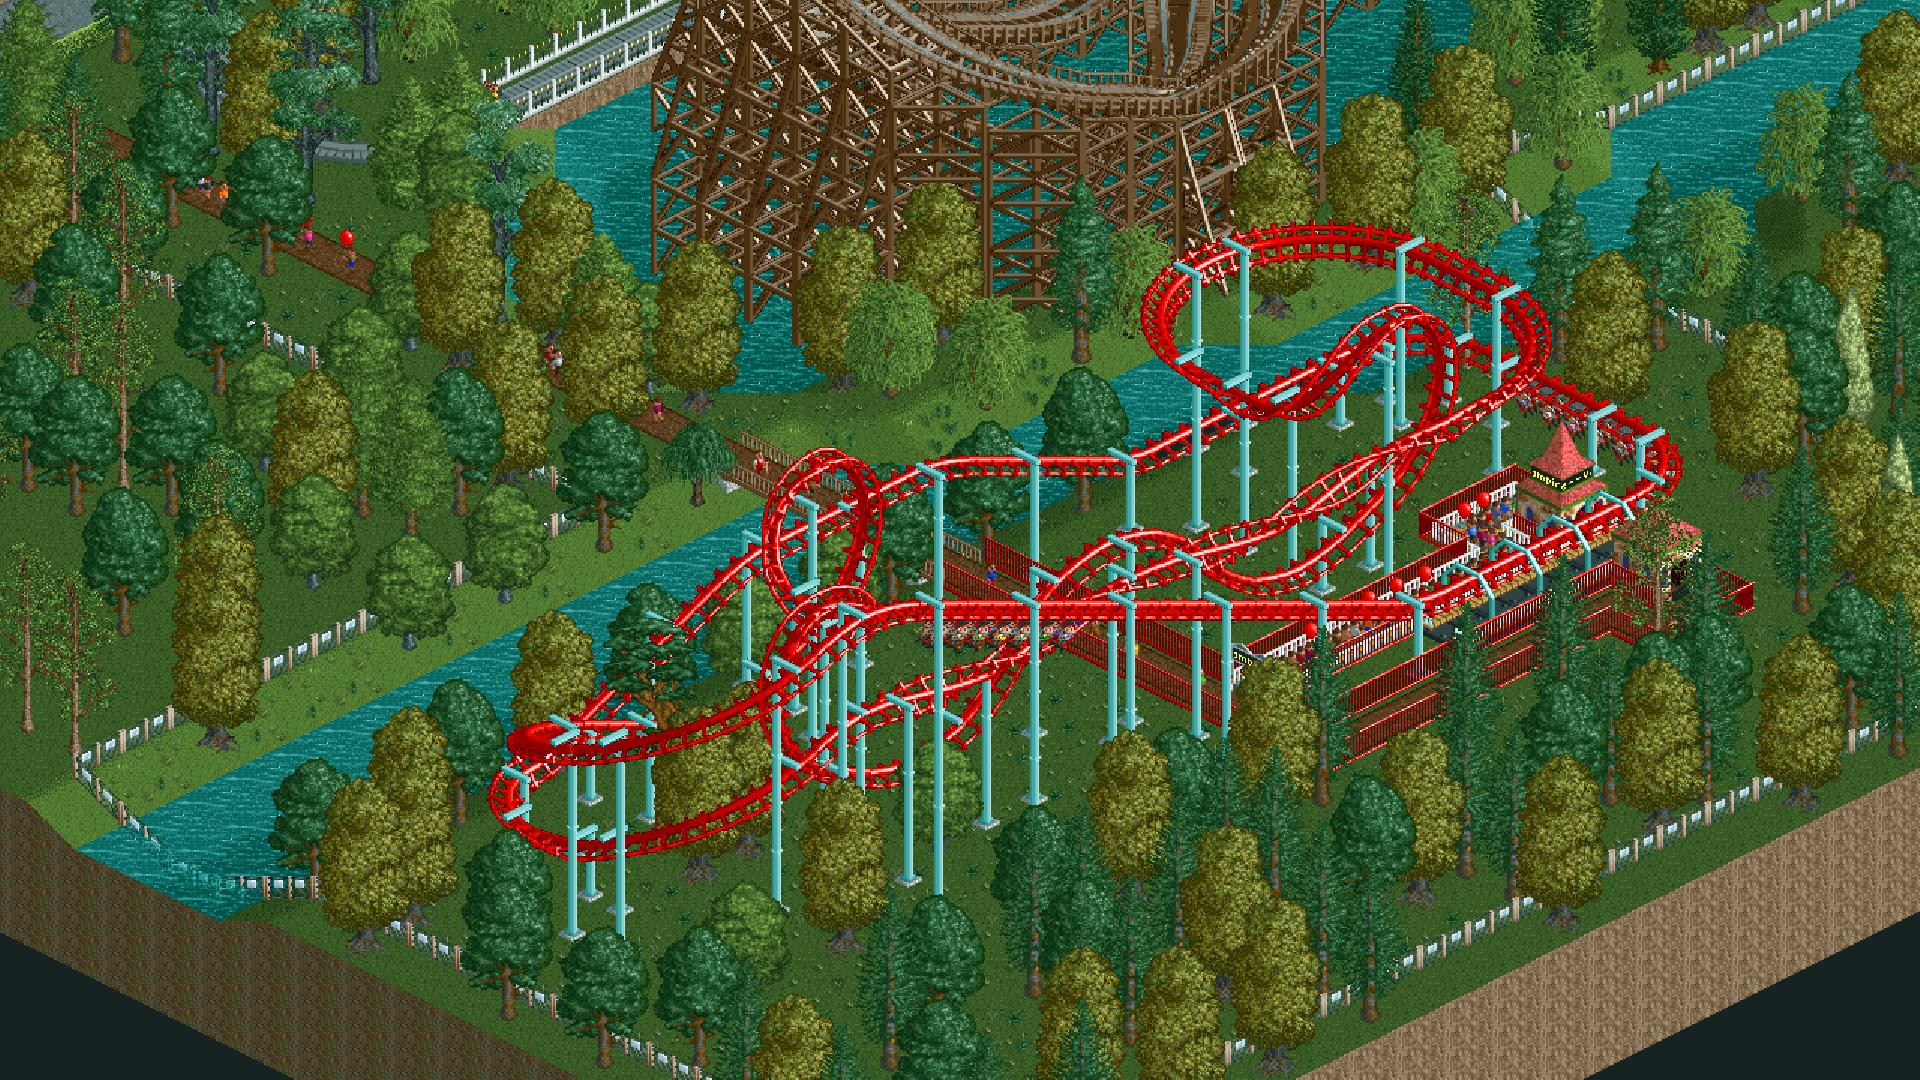 Roller Coaster Tycoon 2: Triple Thrill Pack - Download